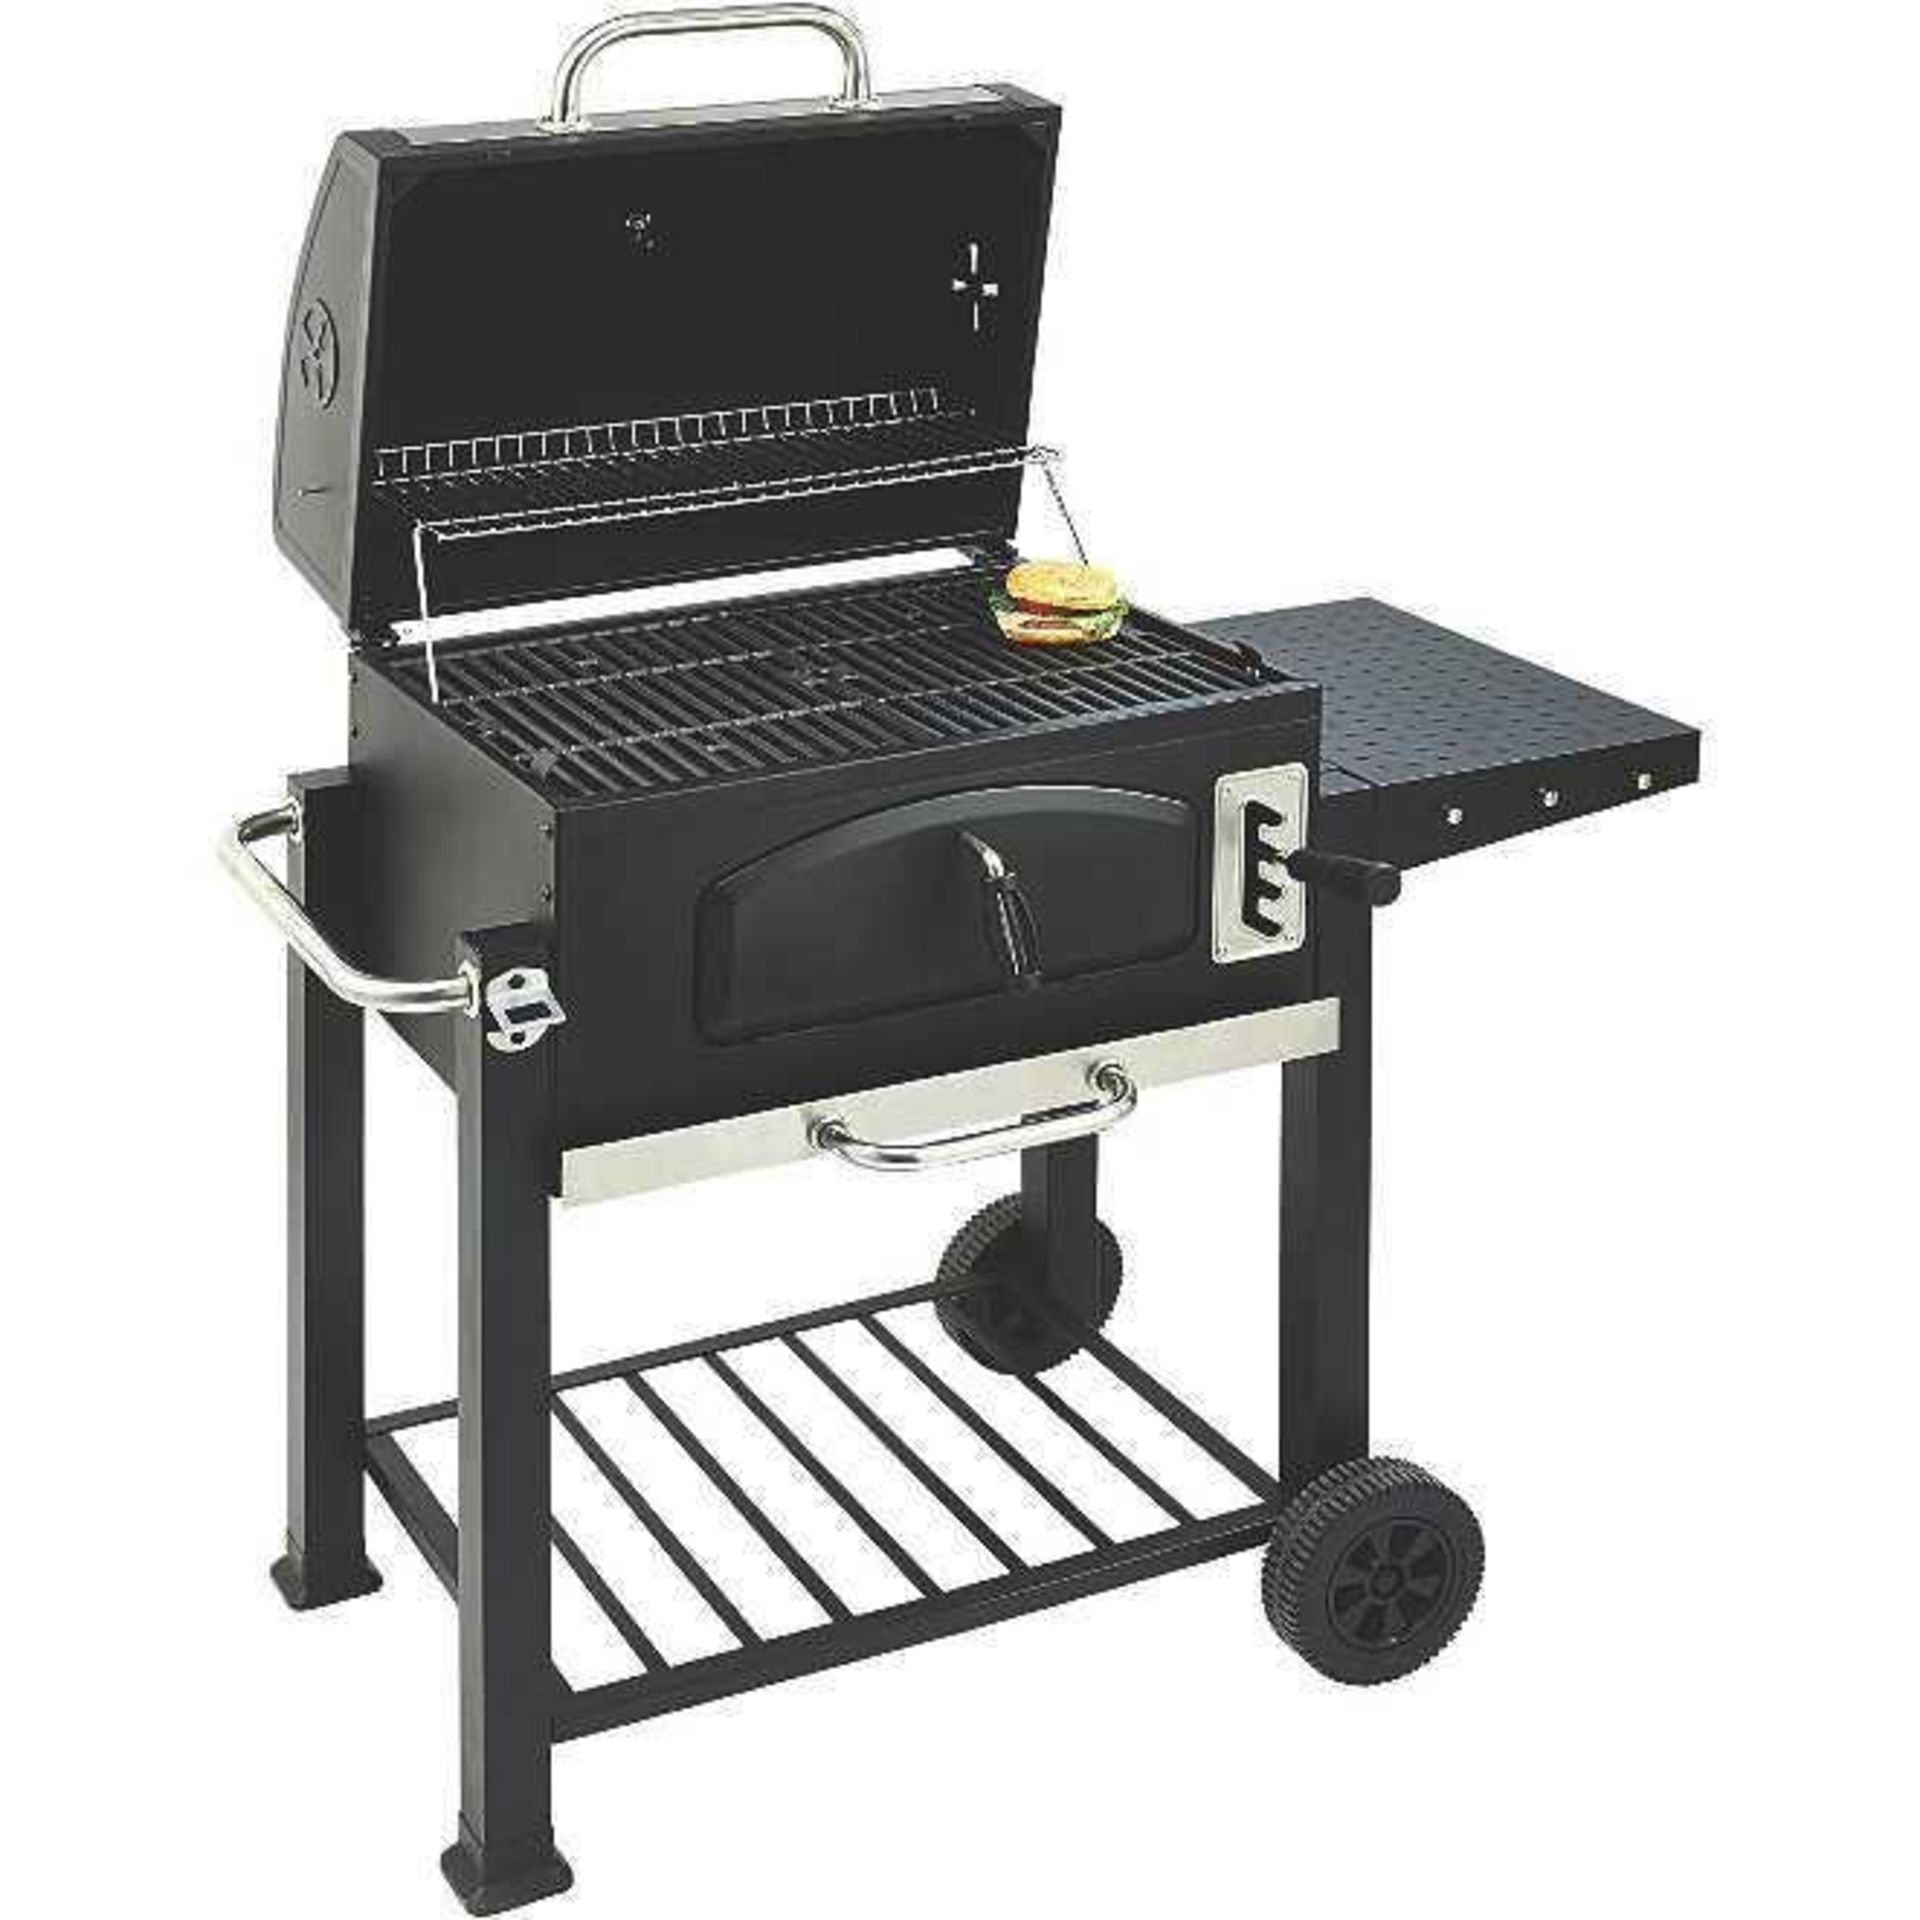 Rrp £100 Boxed Expert Grill 3 Burner Gas Barbecue Grill